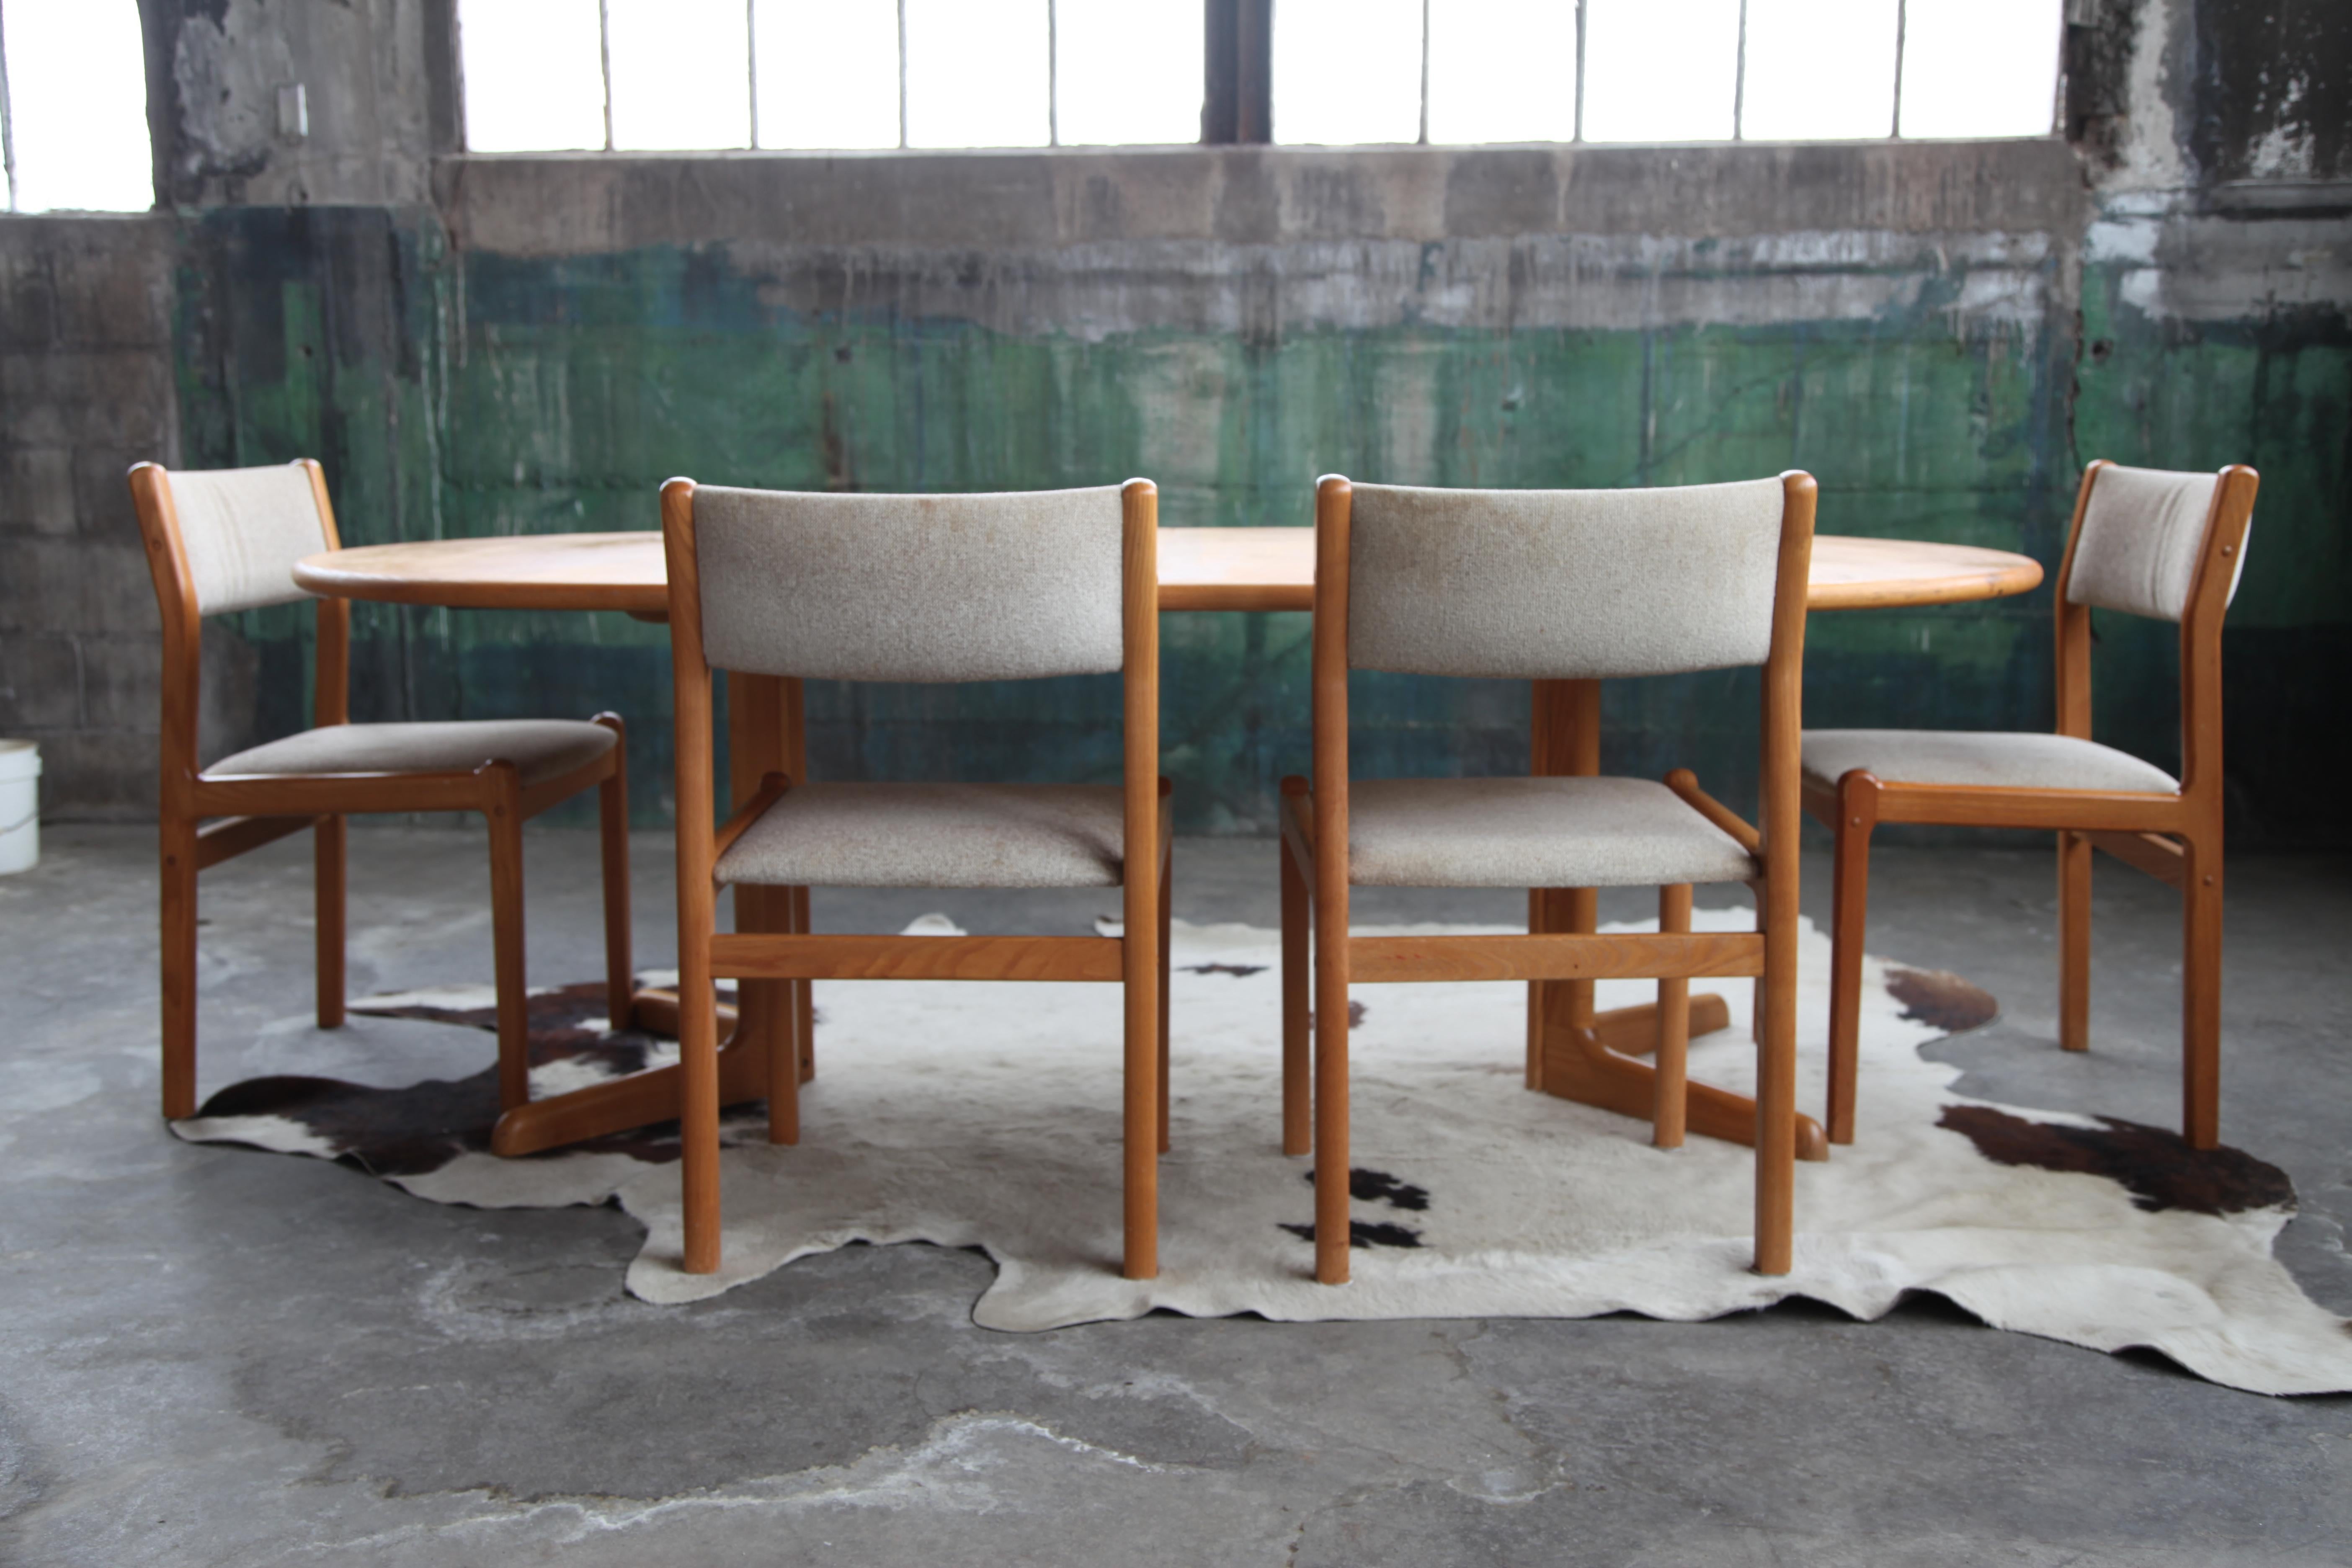 Late 20th Century MCM Round to Oval Dining Table w/ Leaves + 4 Chairs by Gudme Jl Moller, 9 Pcs For Sale